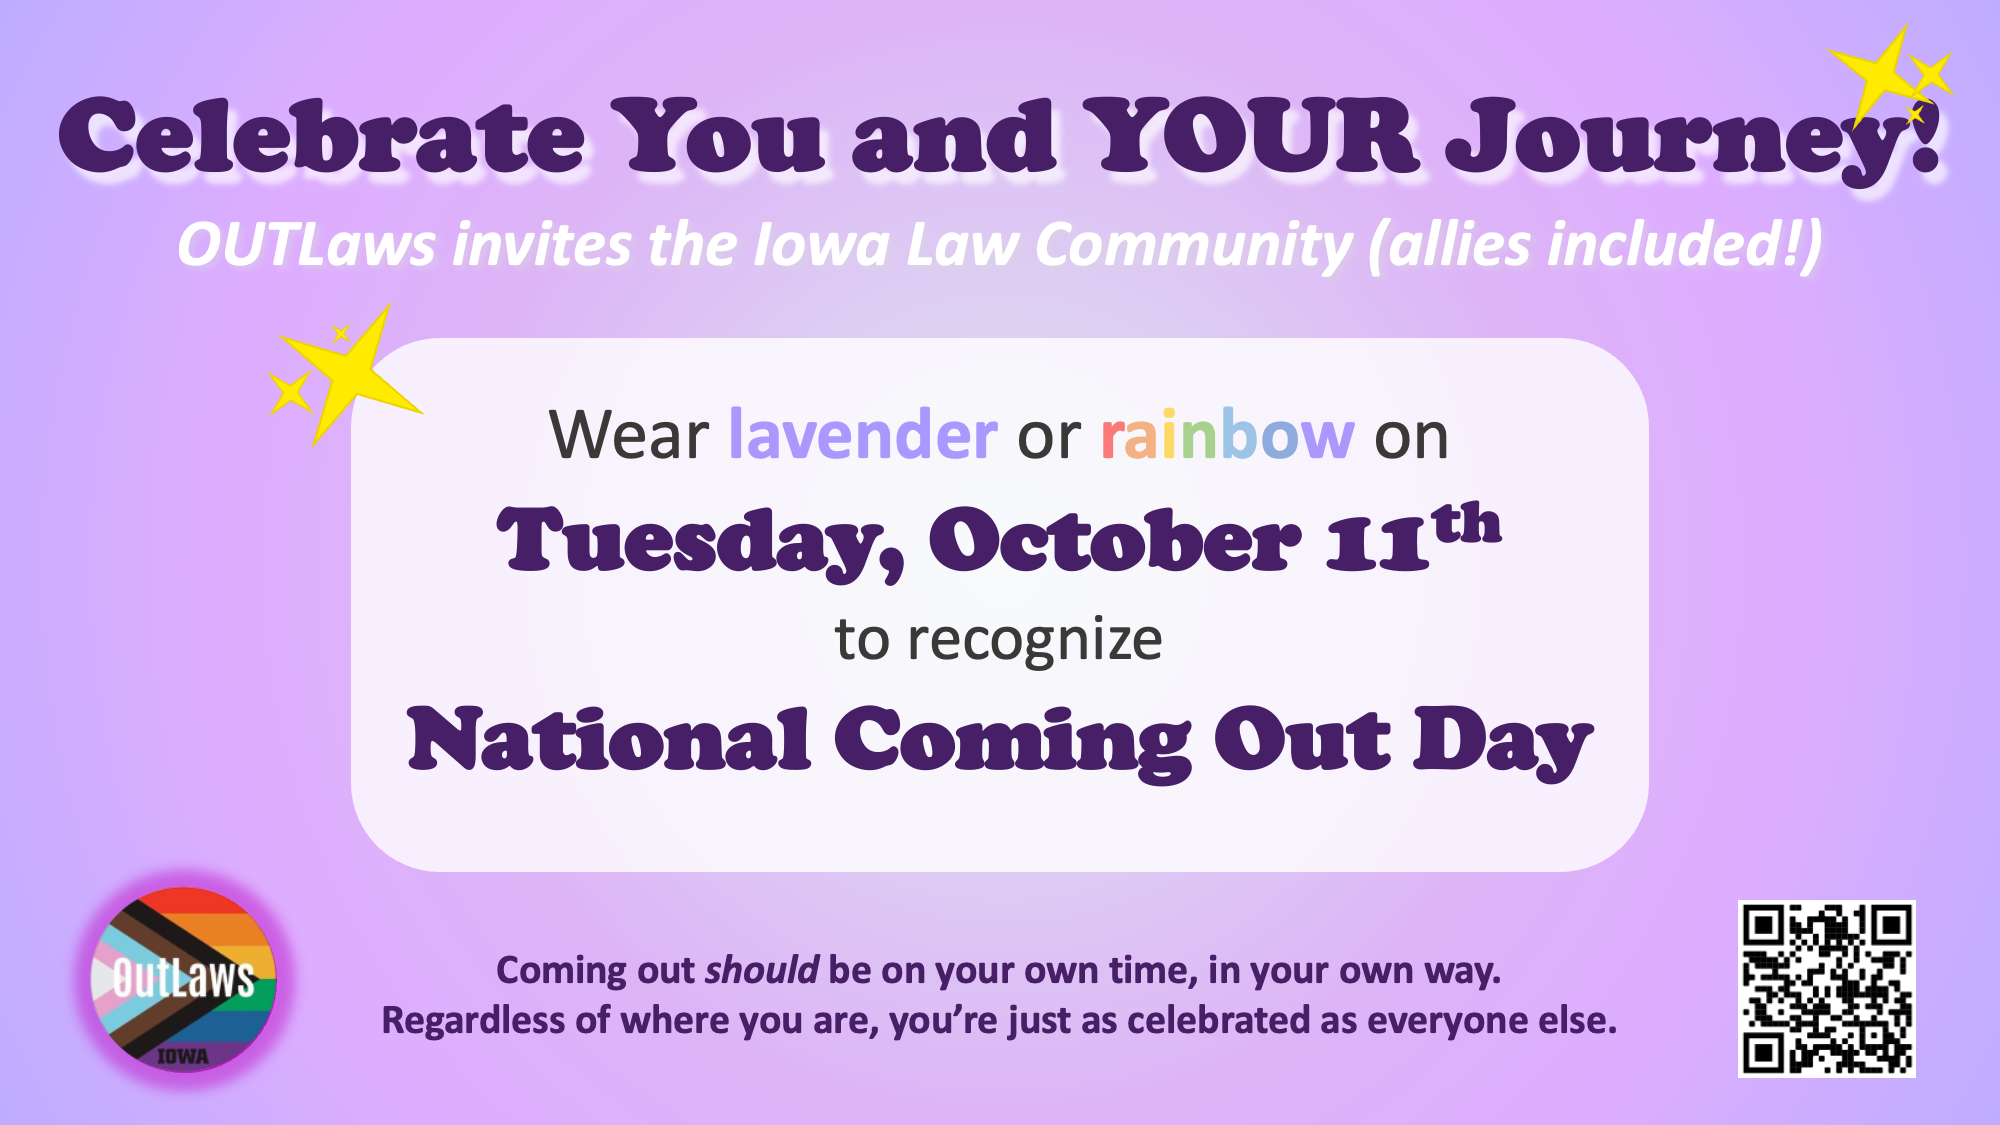    Celebrate You and YOUR Journey!    OUTLaws invites the Iowa Law Community (allies included!)    Wear lavender or rainbow on    Tuesday, October 11    to recognize    National Coming Out Day        Coming out should be on your own time, in your own way.    Regardless of where you are, you're just as celebrated as everyone else.